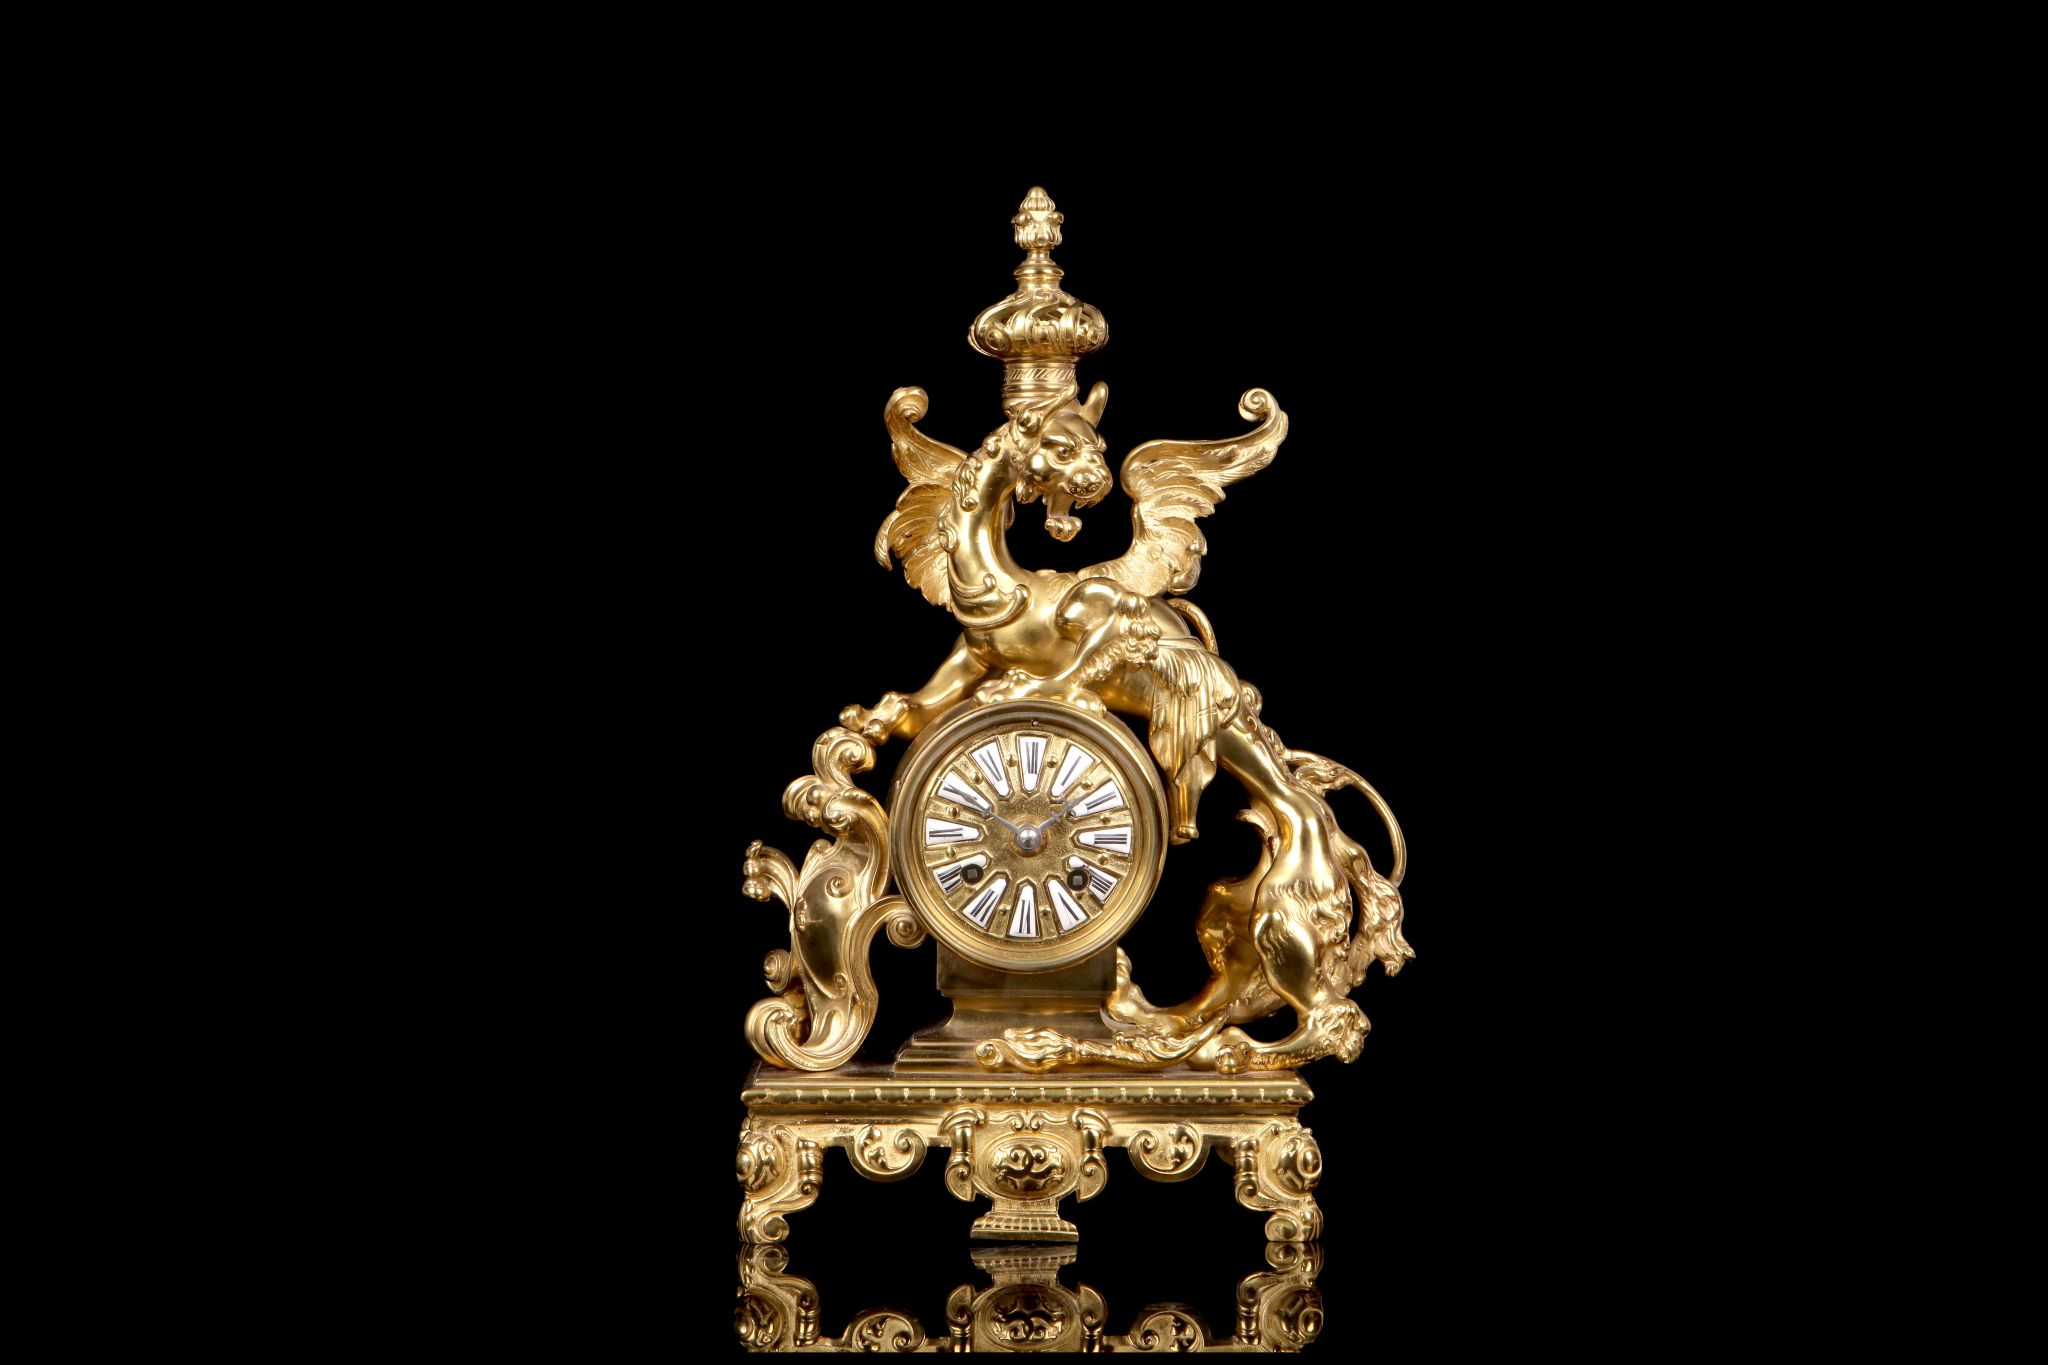 A THIRD QUARTER 19TH CENTURY FRENCH BRONZE MANTEL CLOCK DECORATED WITH A DRAGON the dragon roaring